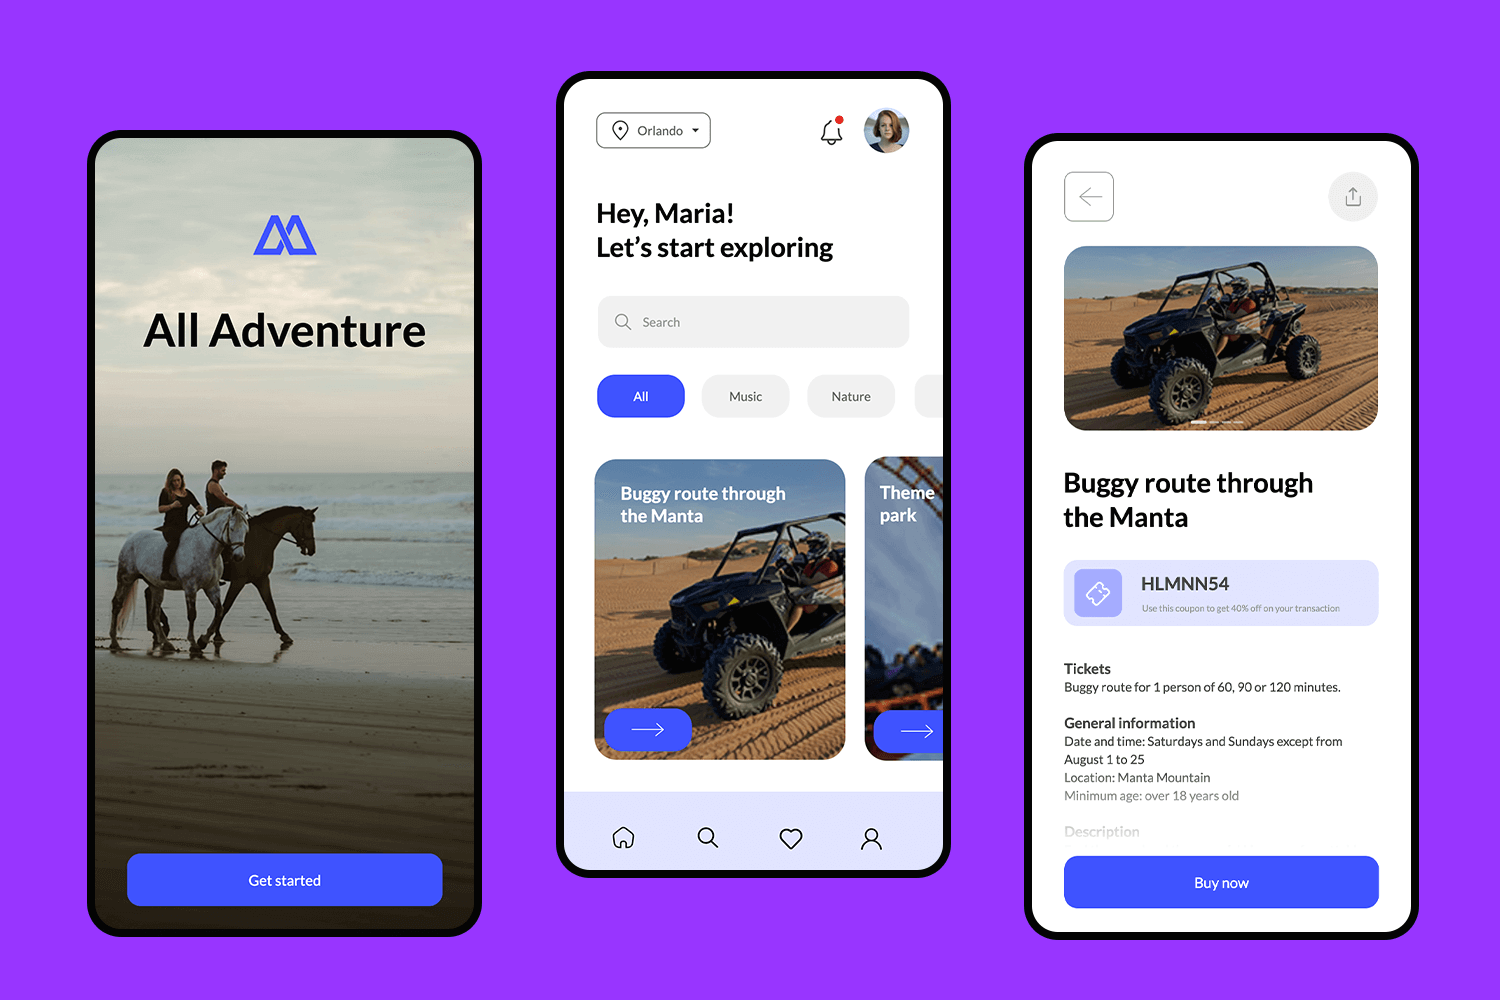 Adventure booking app with options for various activities and detailed event information